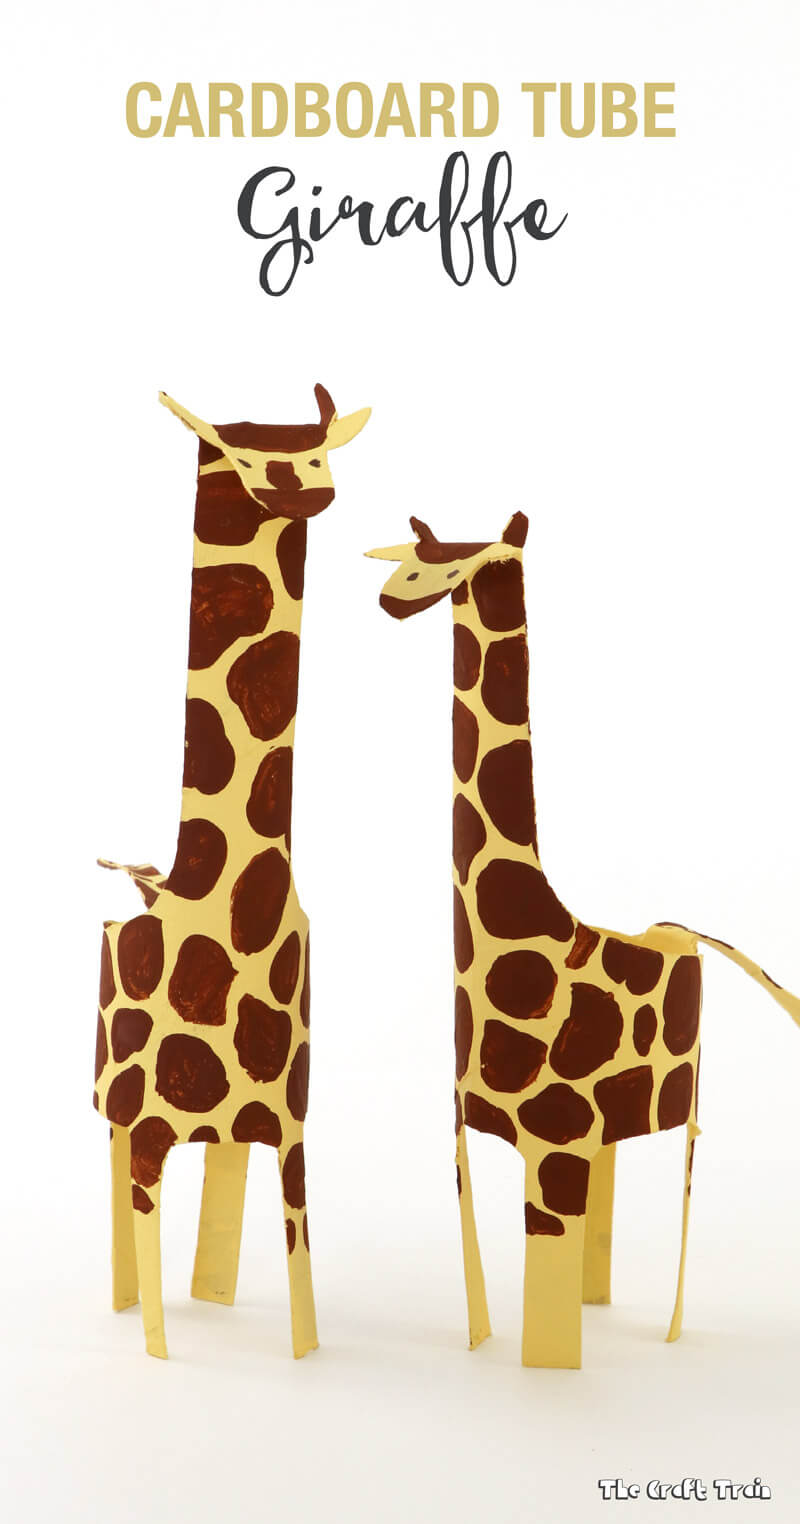 Create a giraffe from a cardboard tube using a simple cut and fold technique. This is a fun and easy animal craft for kids.